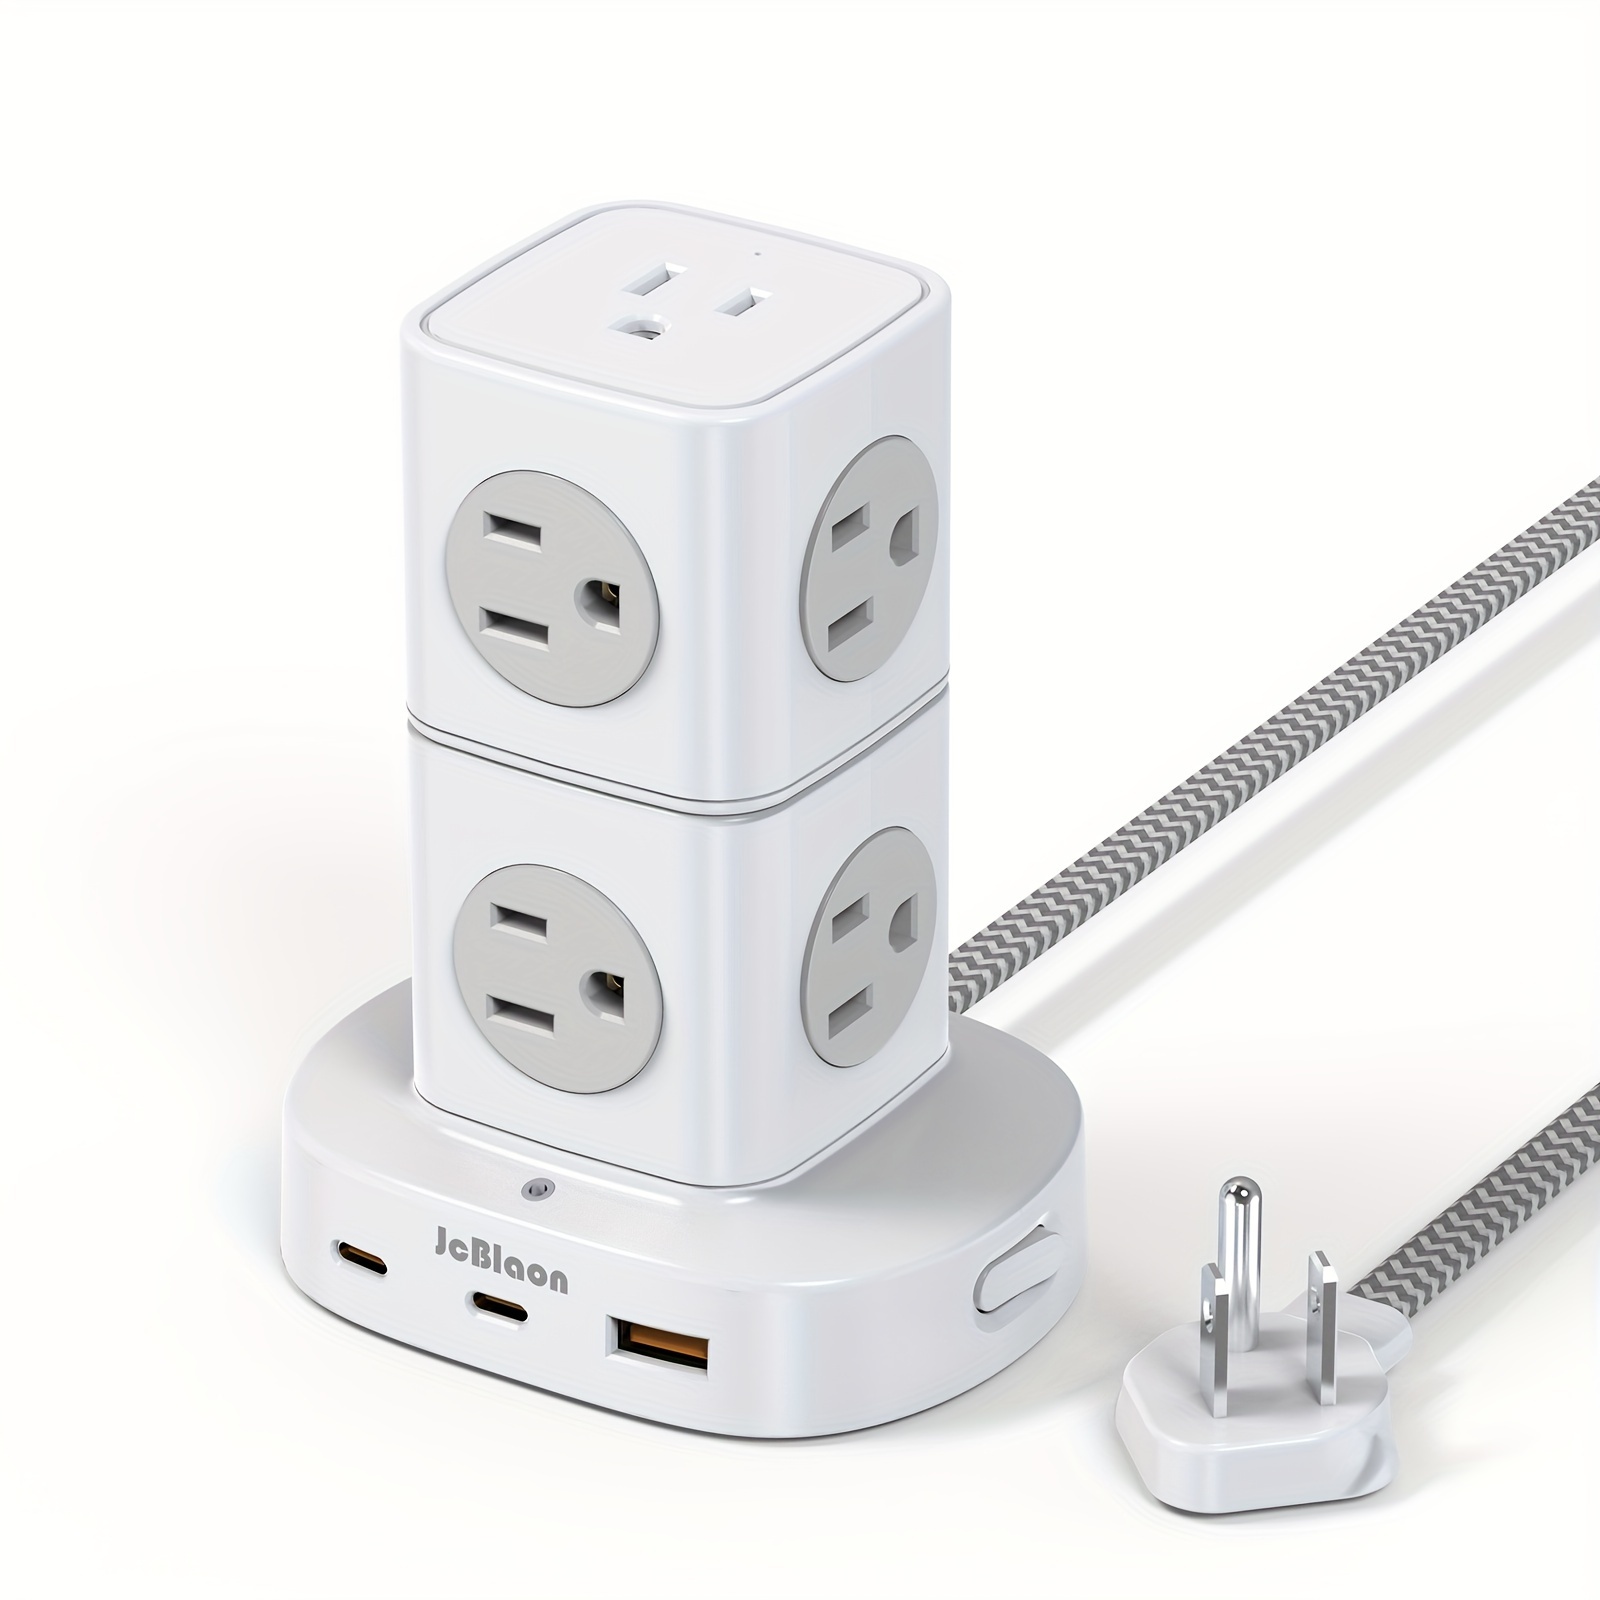 

Tower Power Strip Flat Plug With 9 Outlets 3 Usb (2 Usb C), Jcblaon Protector Power Strip Tower, 5ft Feet Extension Cord With Multiple Outlets, Office Desk Supplies, Dorm Essentials